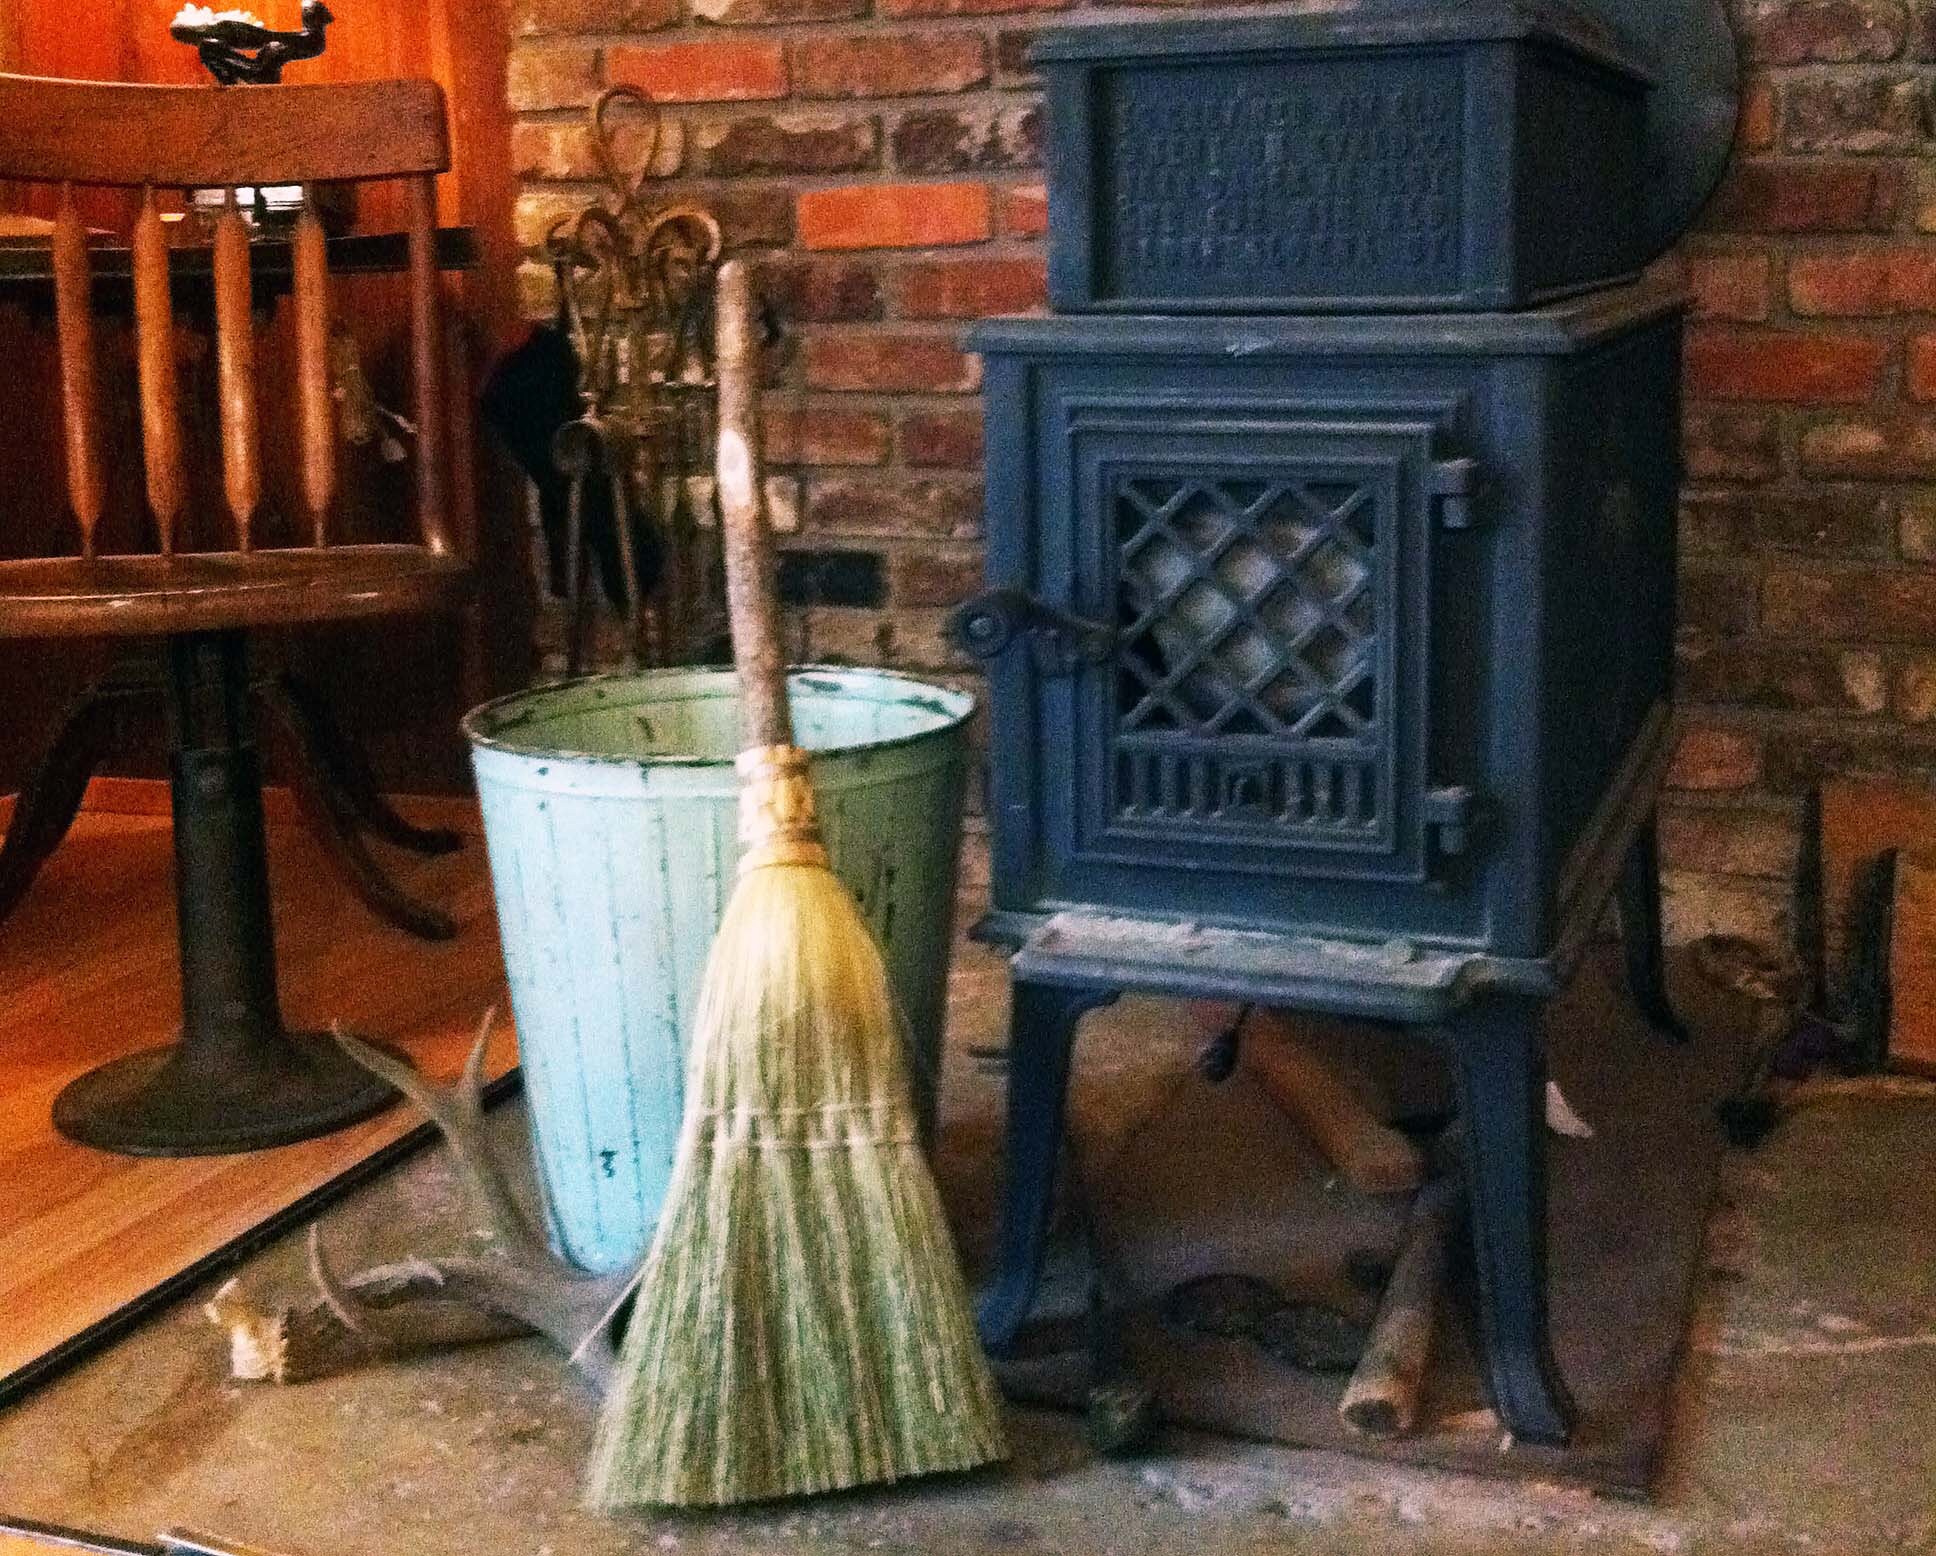 Fireplace Broom in your choice of Natural, Black, Rust or Mixed Broomcorn -...